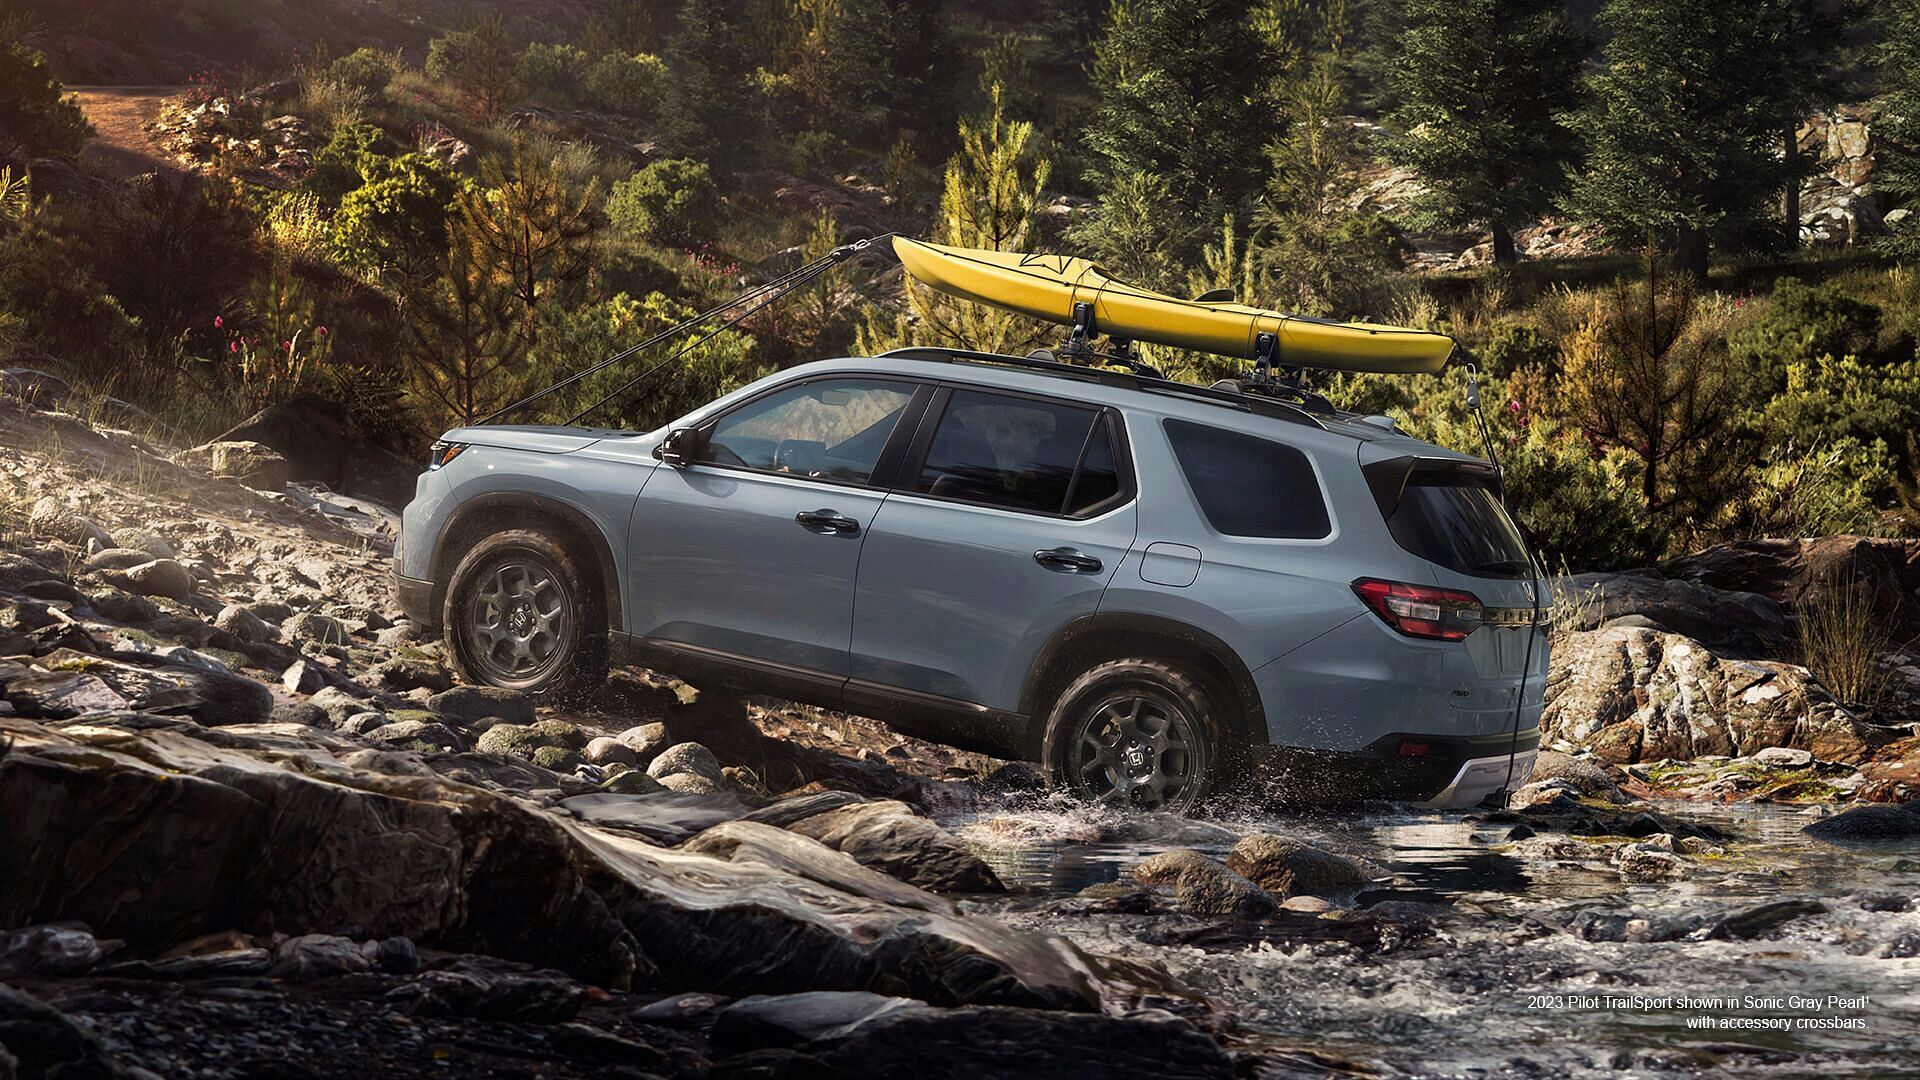 A Sonic Gray Pearl Honda Pilot TrailSport 2023 with accessory crossbars and kayak attachment driving through forest stream